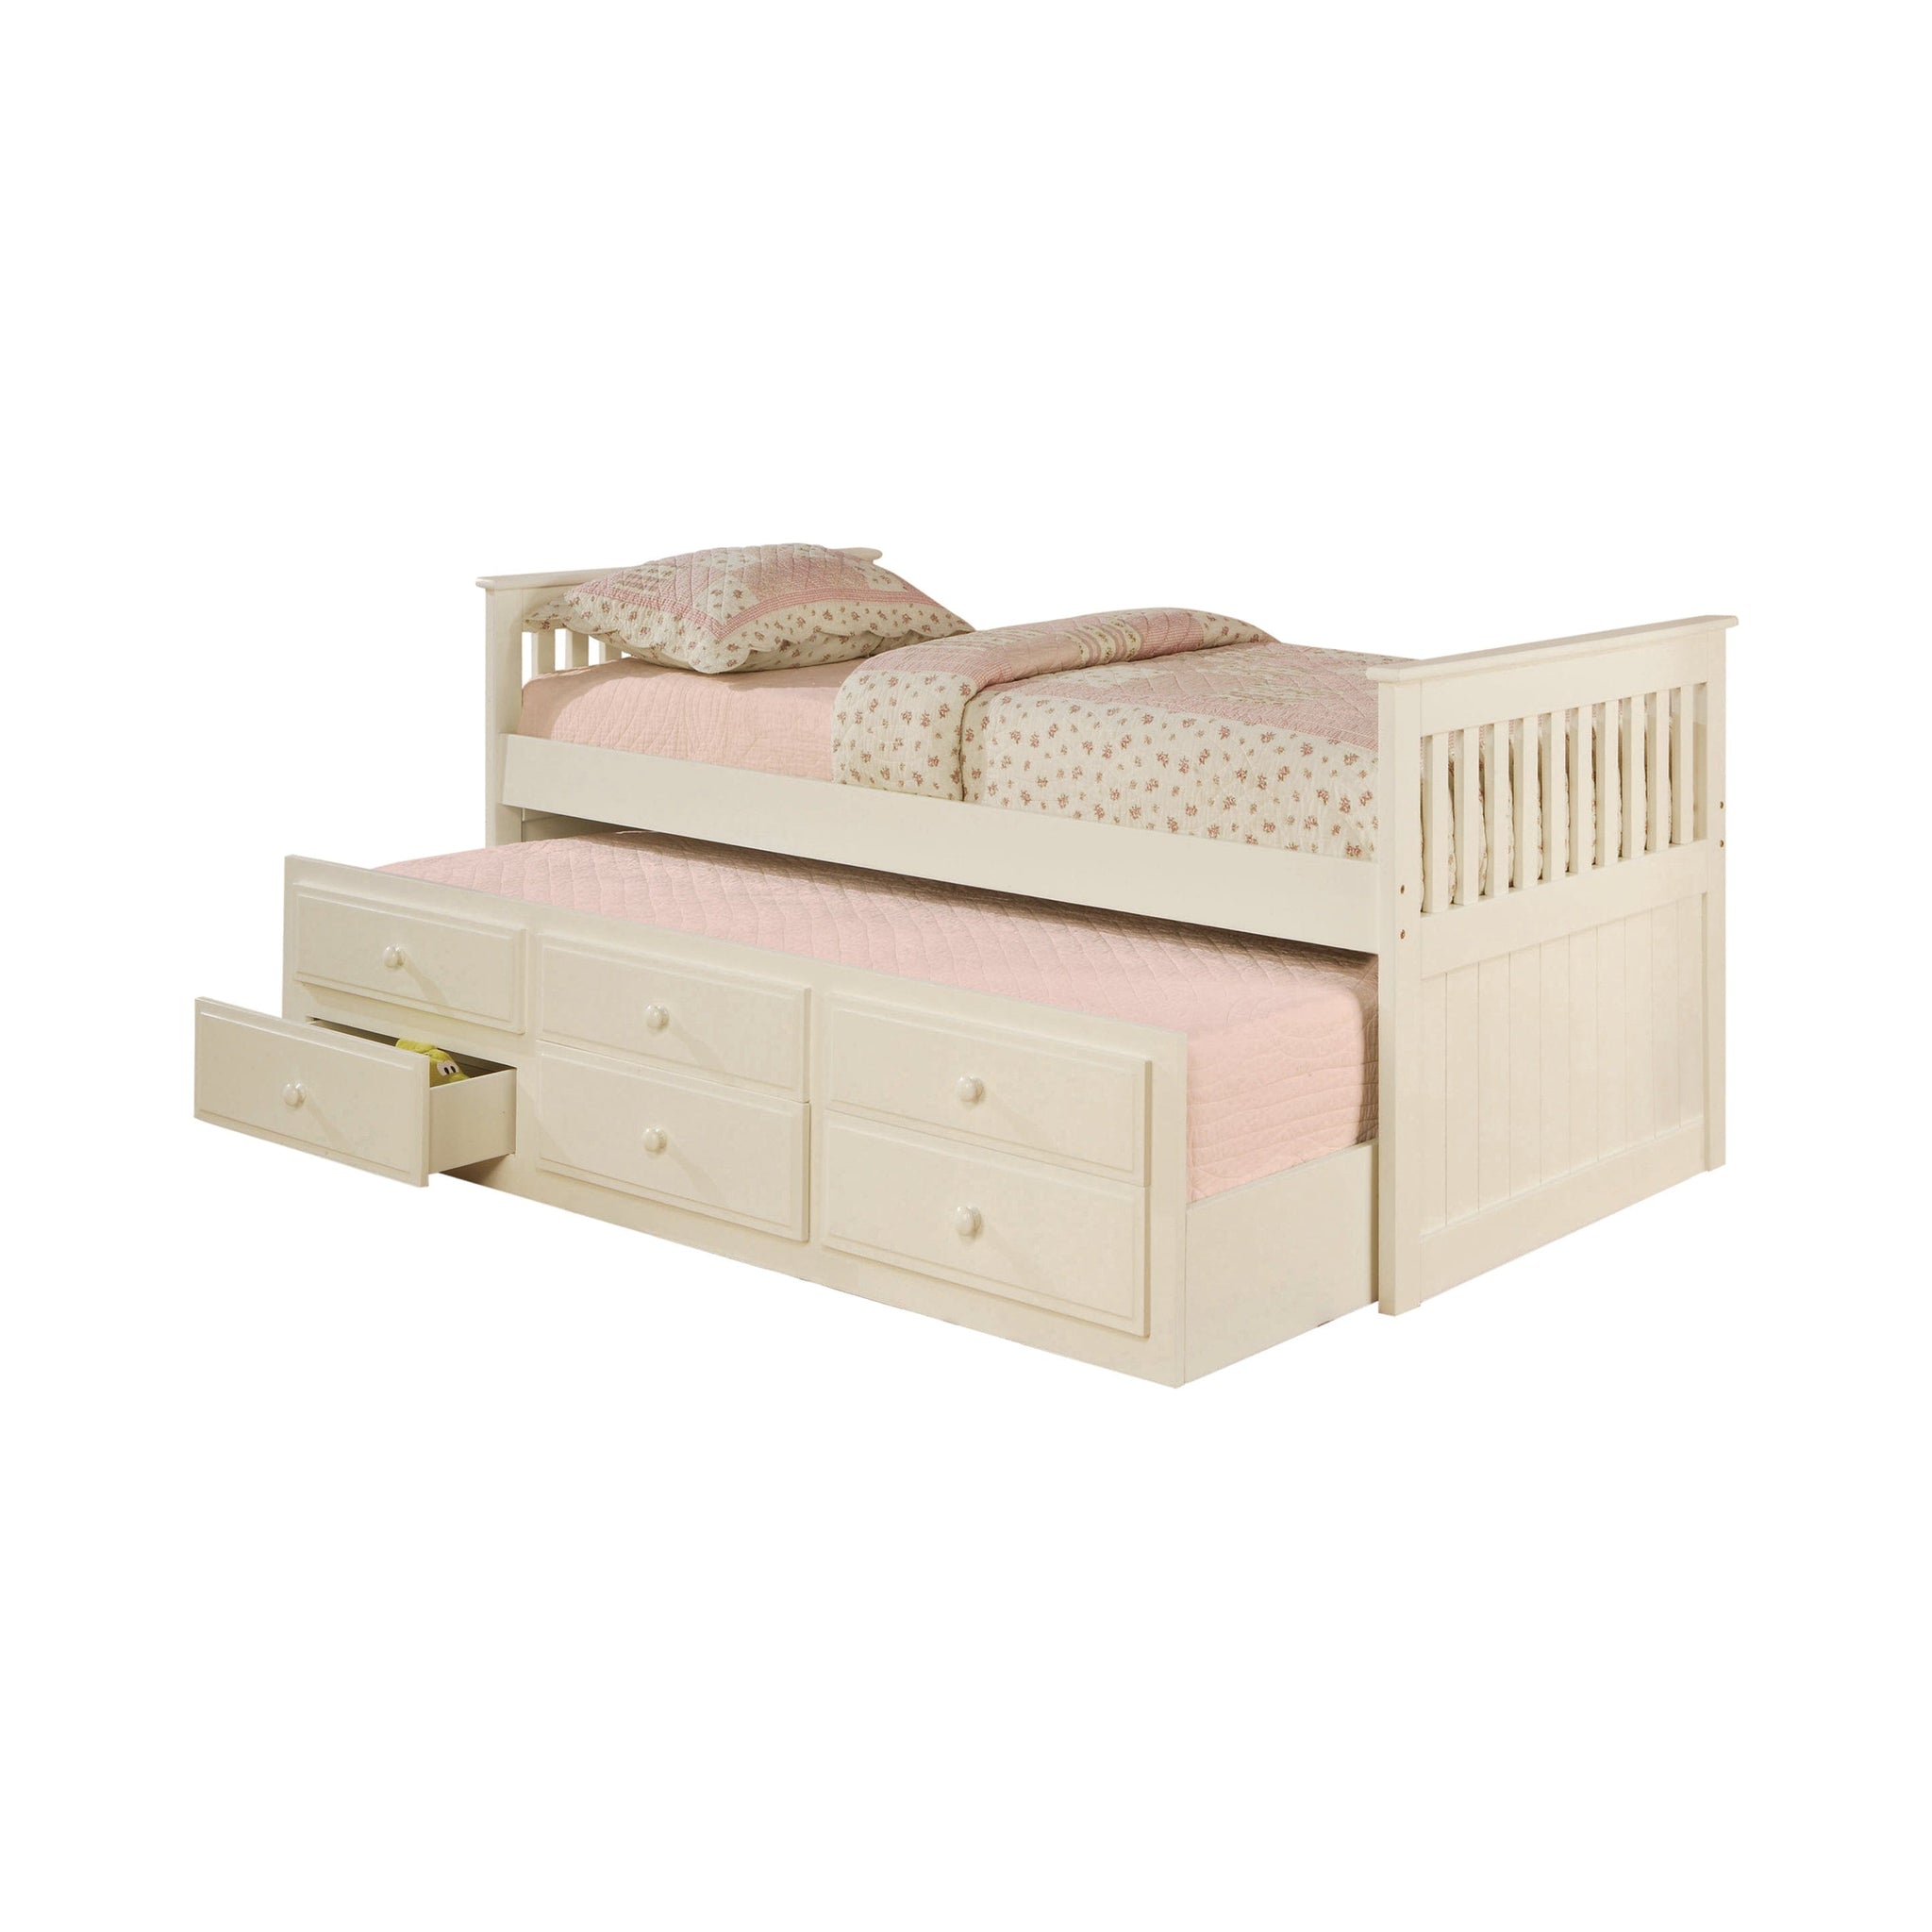 Twin Captain’s Bed With Storage Trundle White - 300107